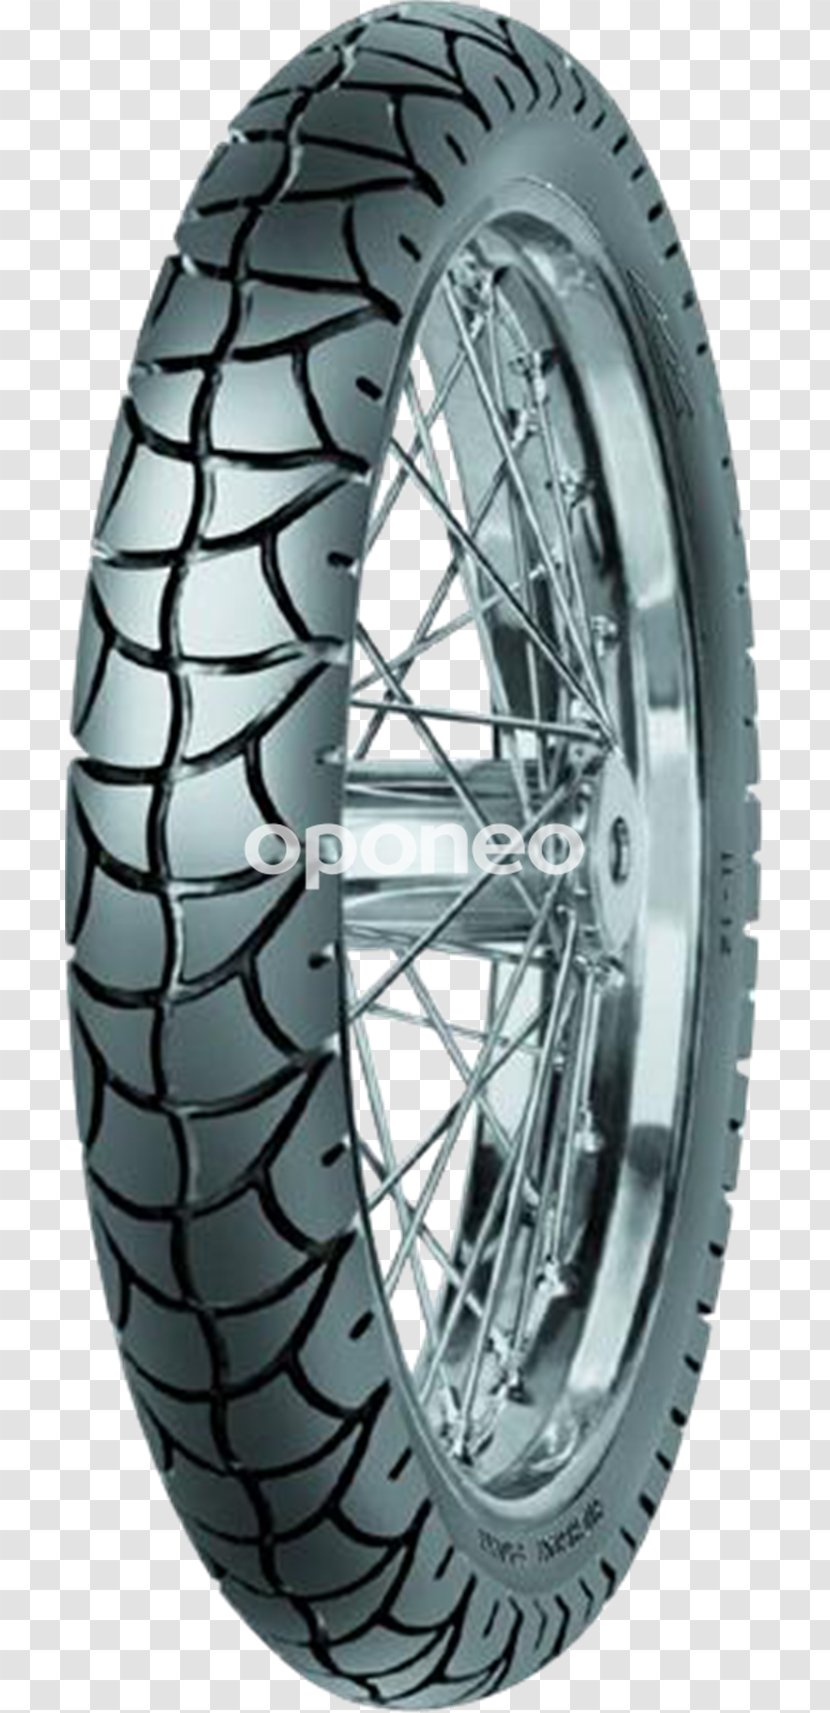 Tread Bicycle Tires Motorcycle Alloy Wheel - Automotive Tire Transparent PNG